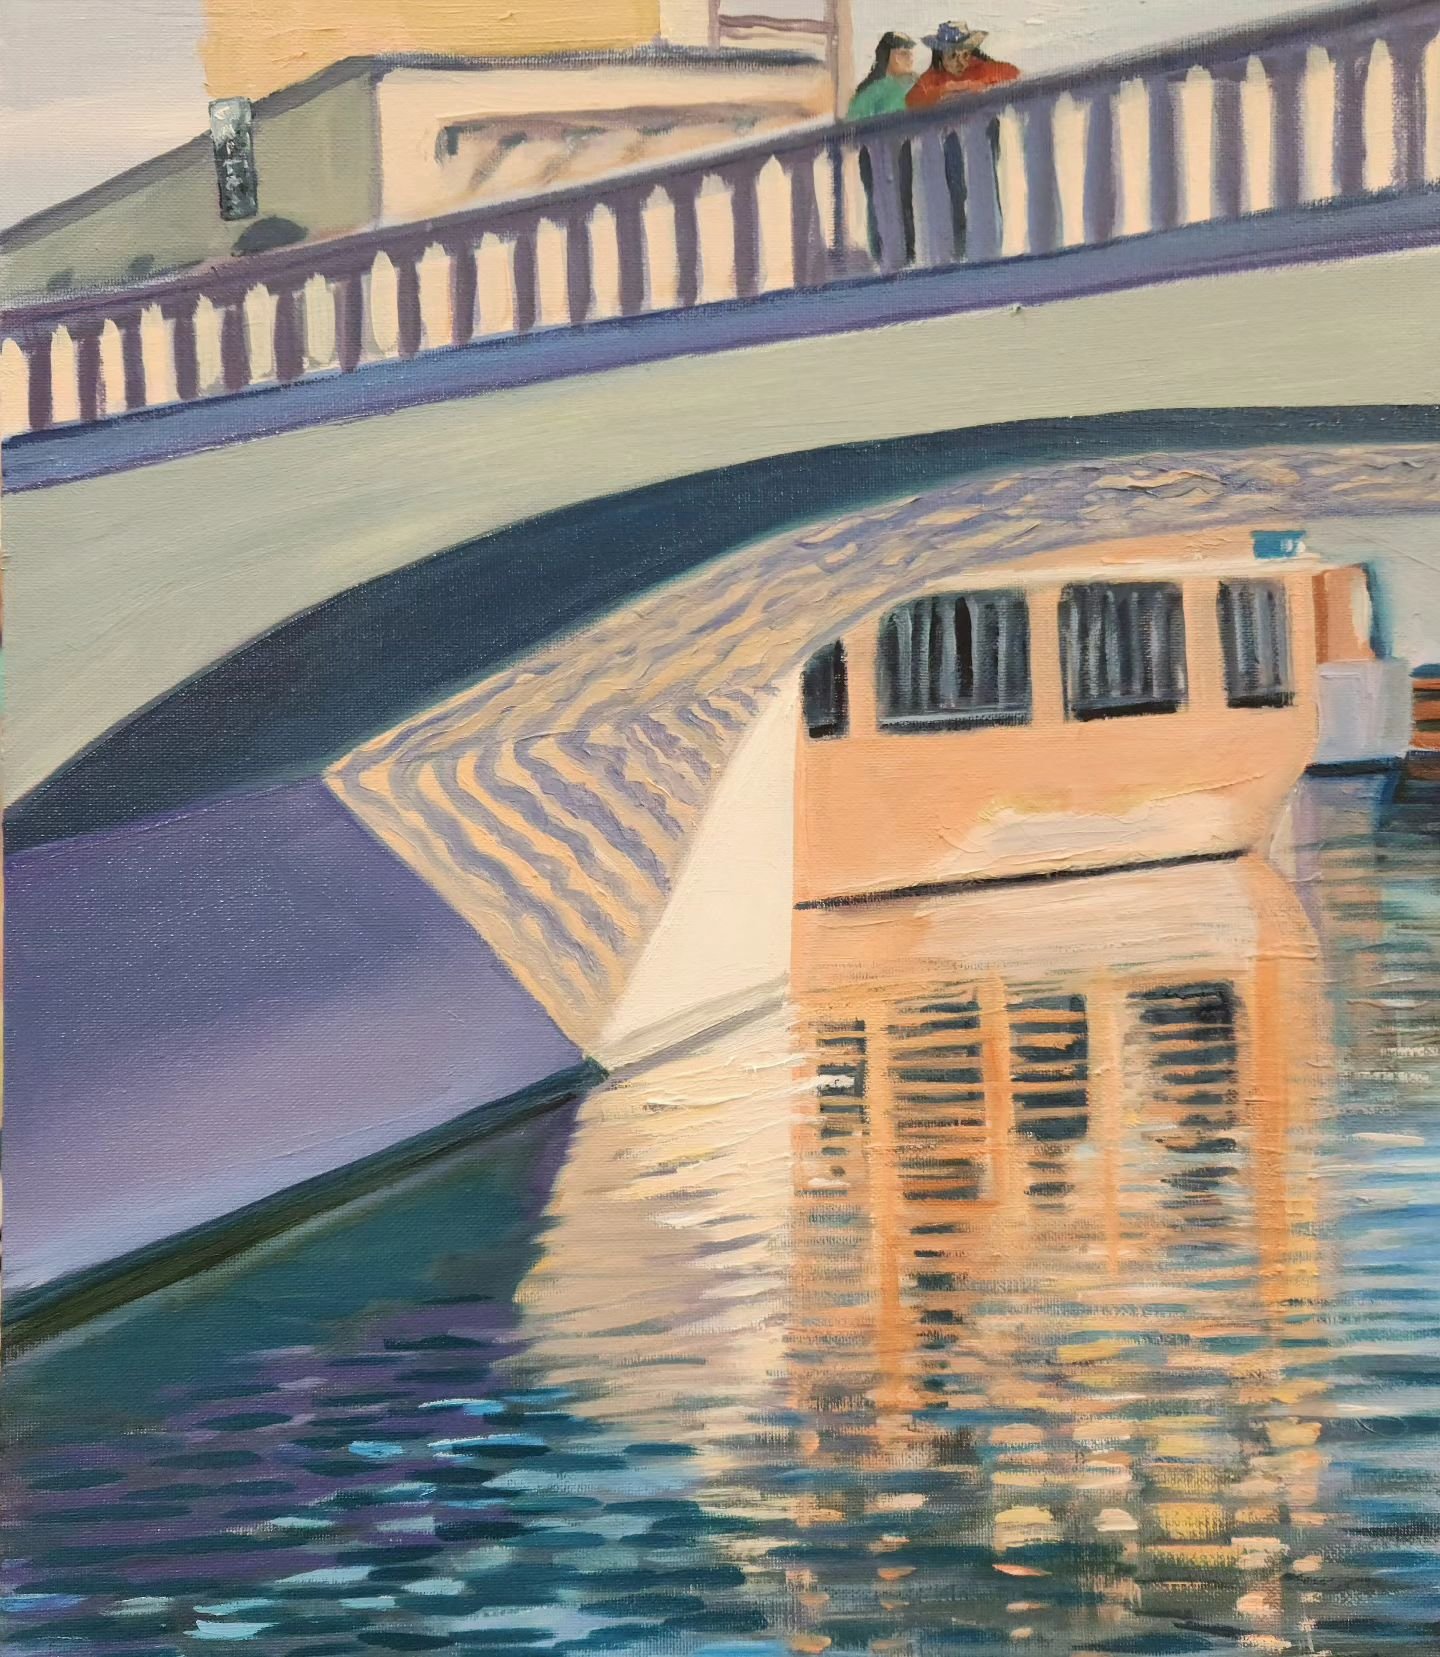 &quot;Capitola Bridge Reflections&quot;
Oil on canvas 

Another painting for the show we are hanging tomorrow @oswaldrestaurant downtown SantaCruz.  A lot of work!
But I am excited to share the joy I had I  creating this work! 
Show May and June 
Rec